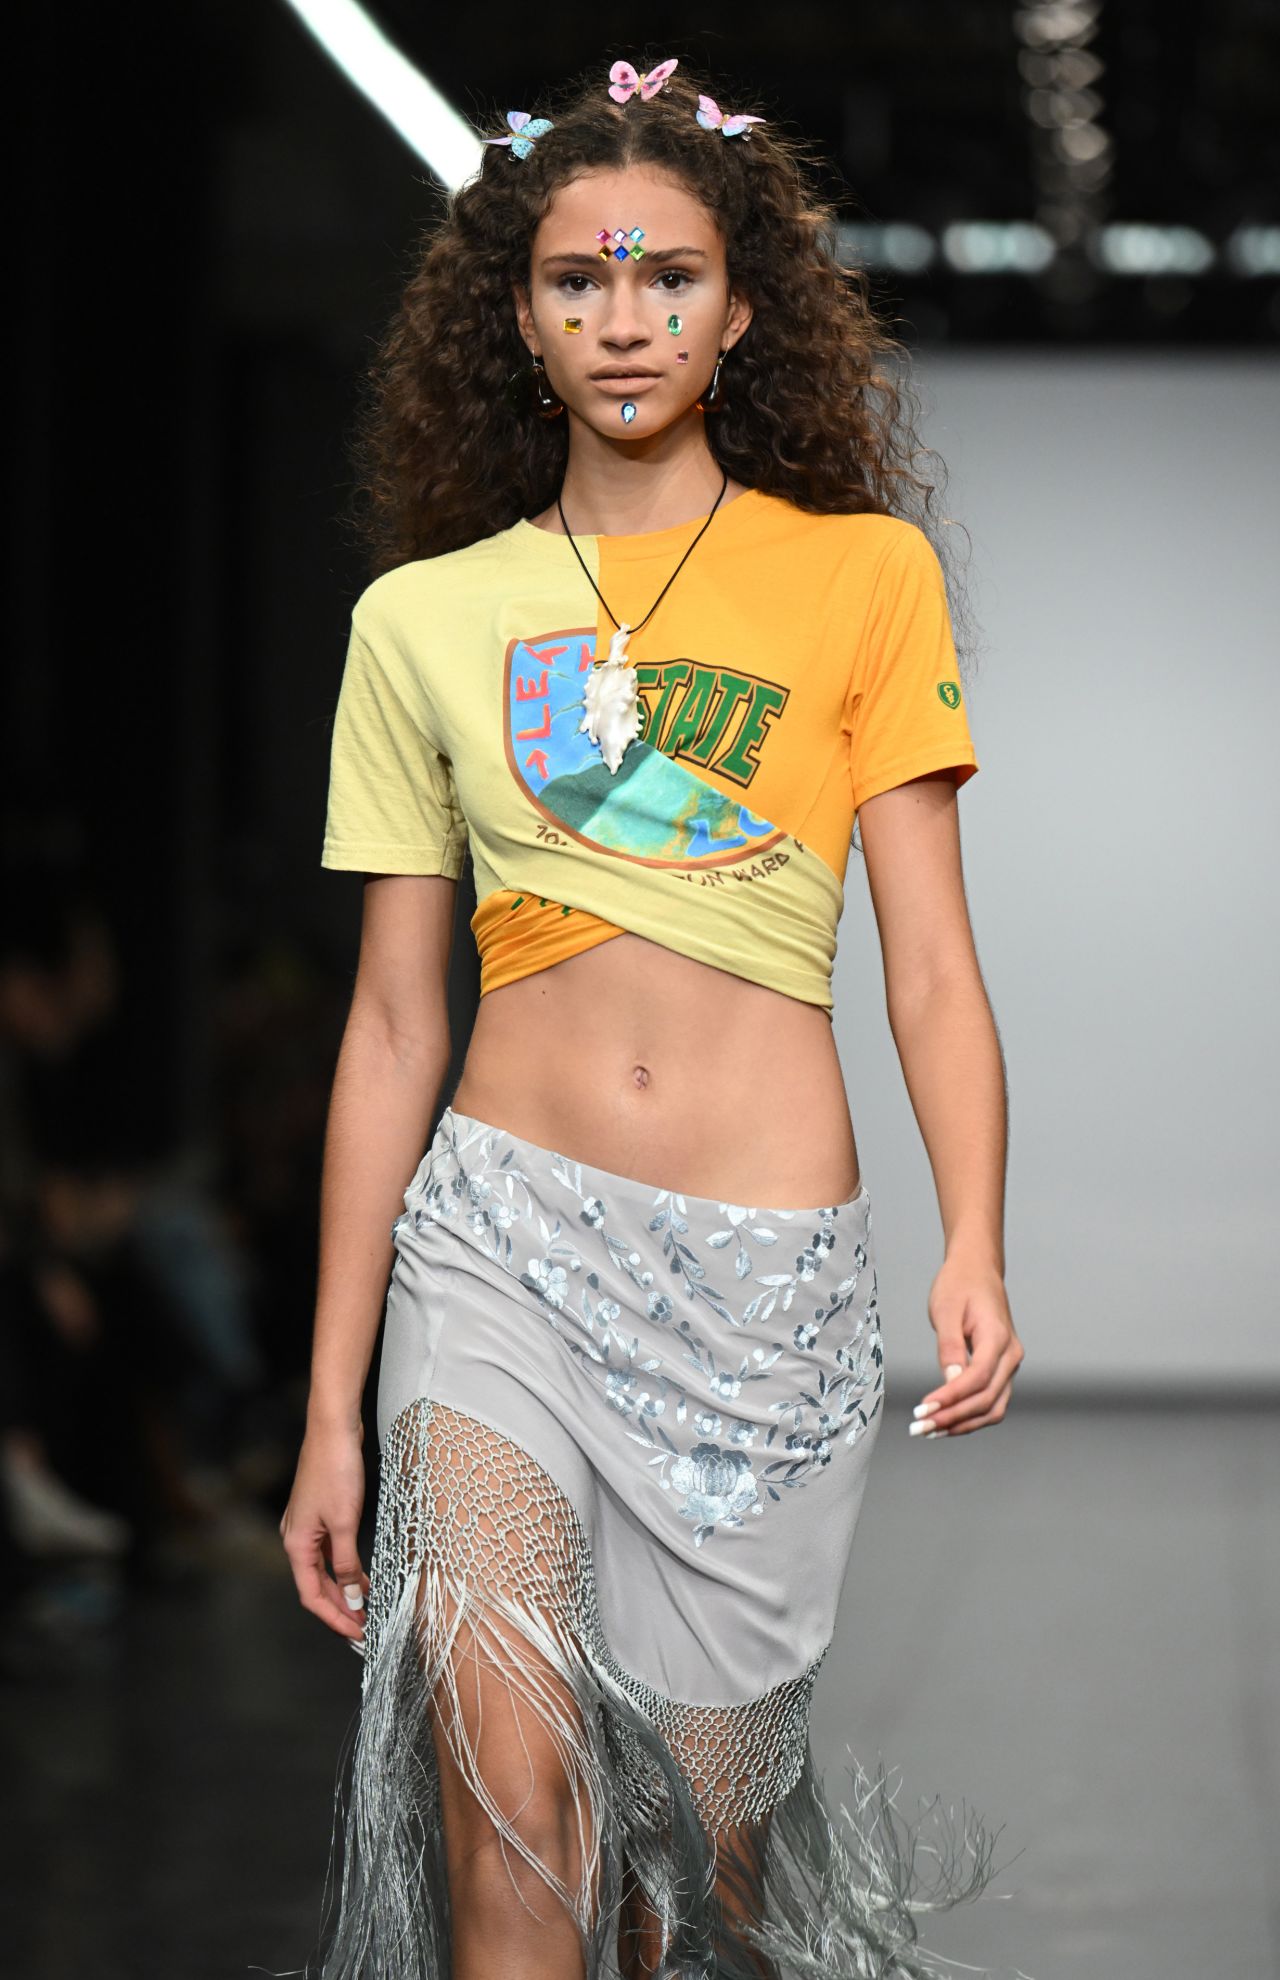 Butterfly clips, beaded sarongs and face-gems gave the Conner Ives show a '90s feel.